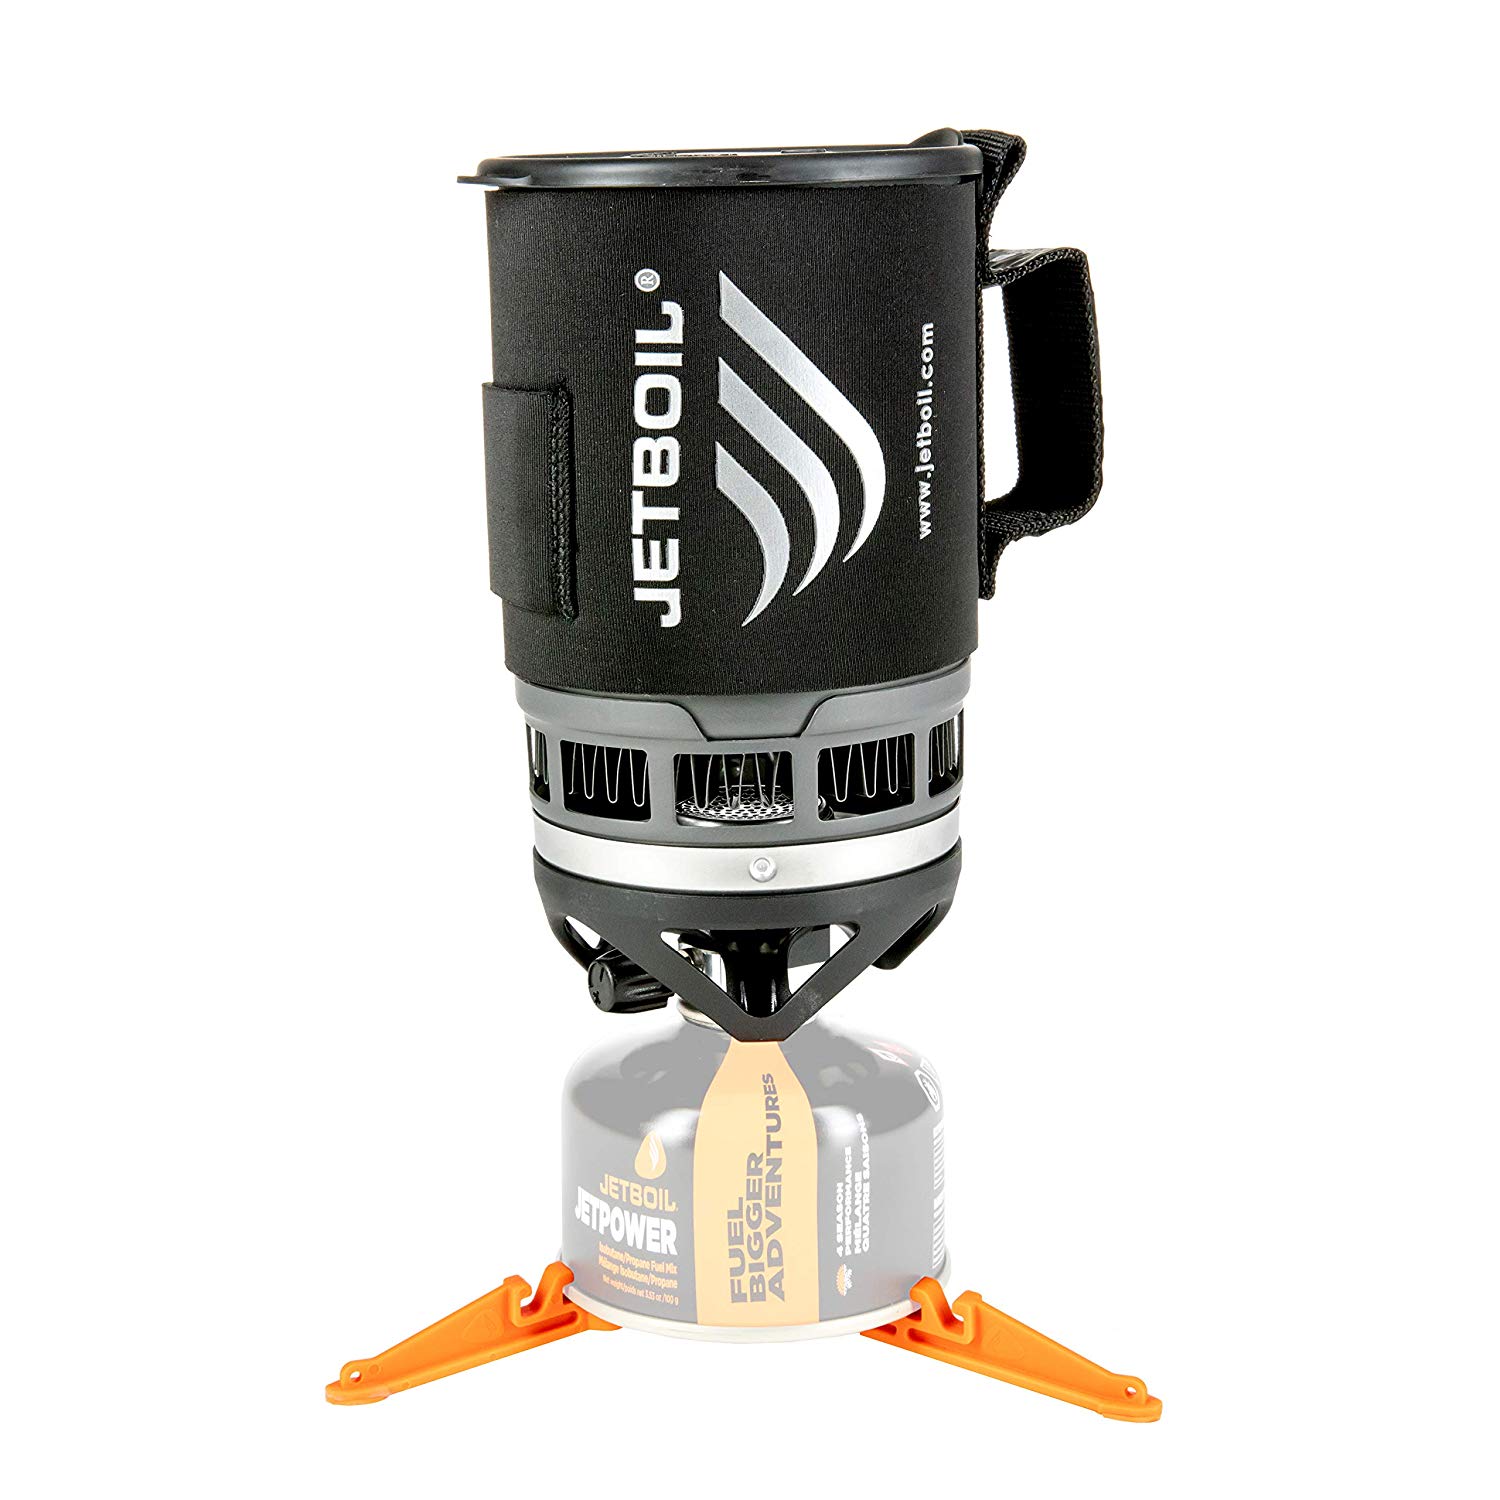 Jetboil FluxRing Fuel Stabilizing Cooking Stove